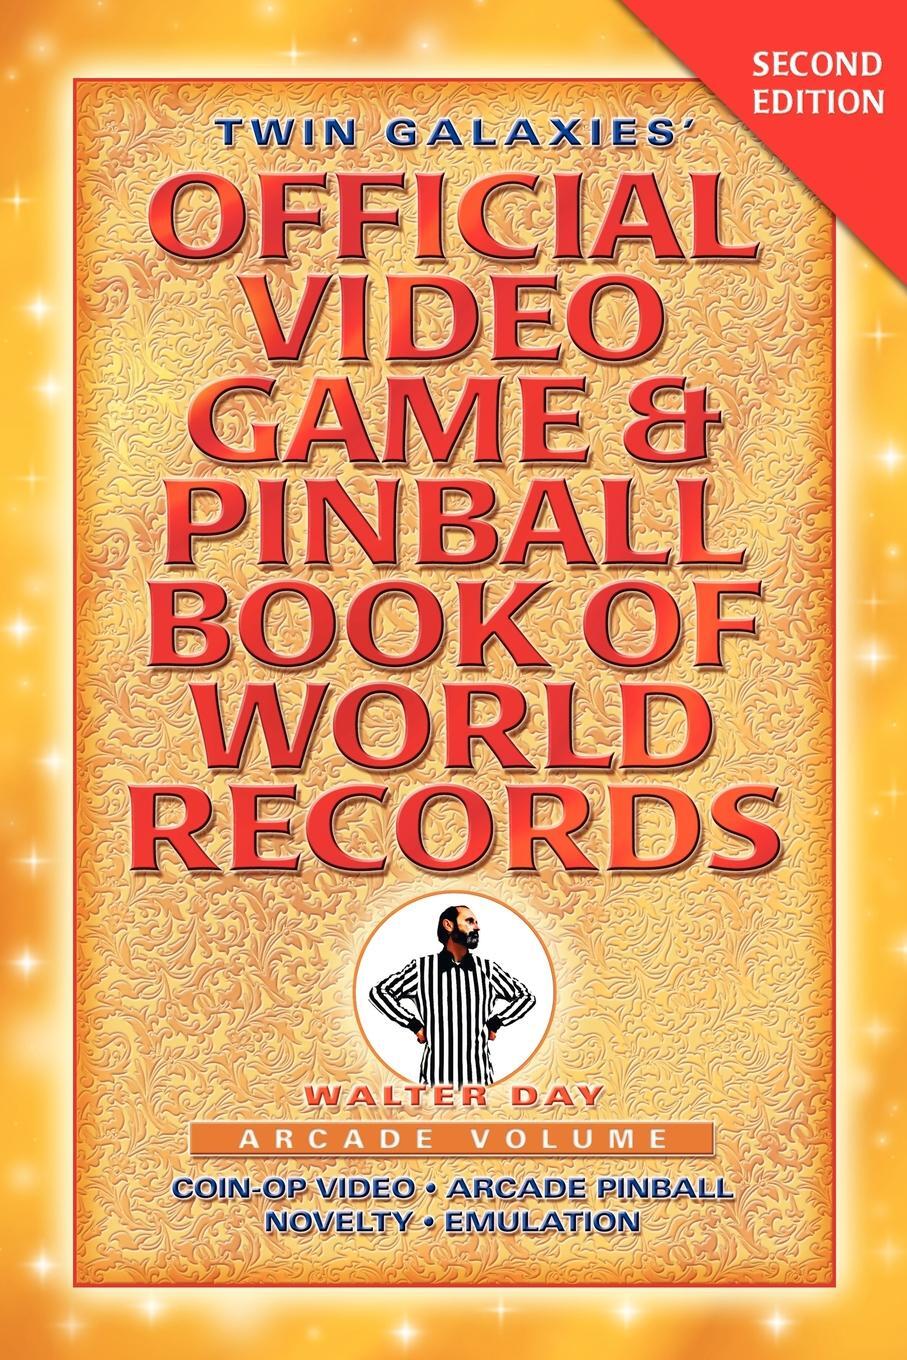 фото Twin Galaxies' Official Video Game & Pinball Book Of World Records; Arcade Volume, Second Edition